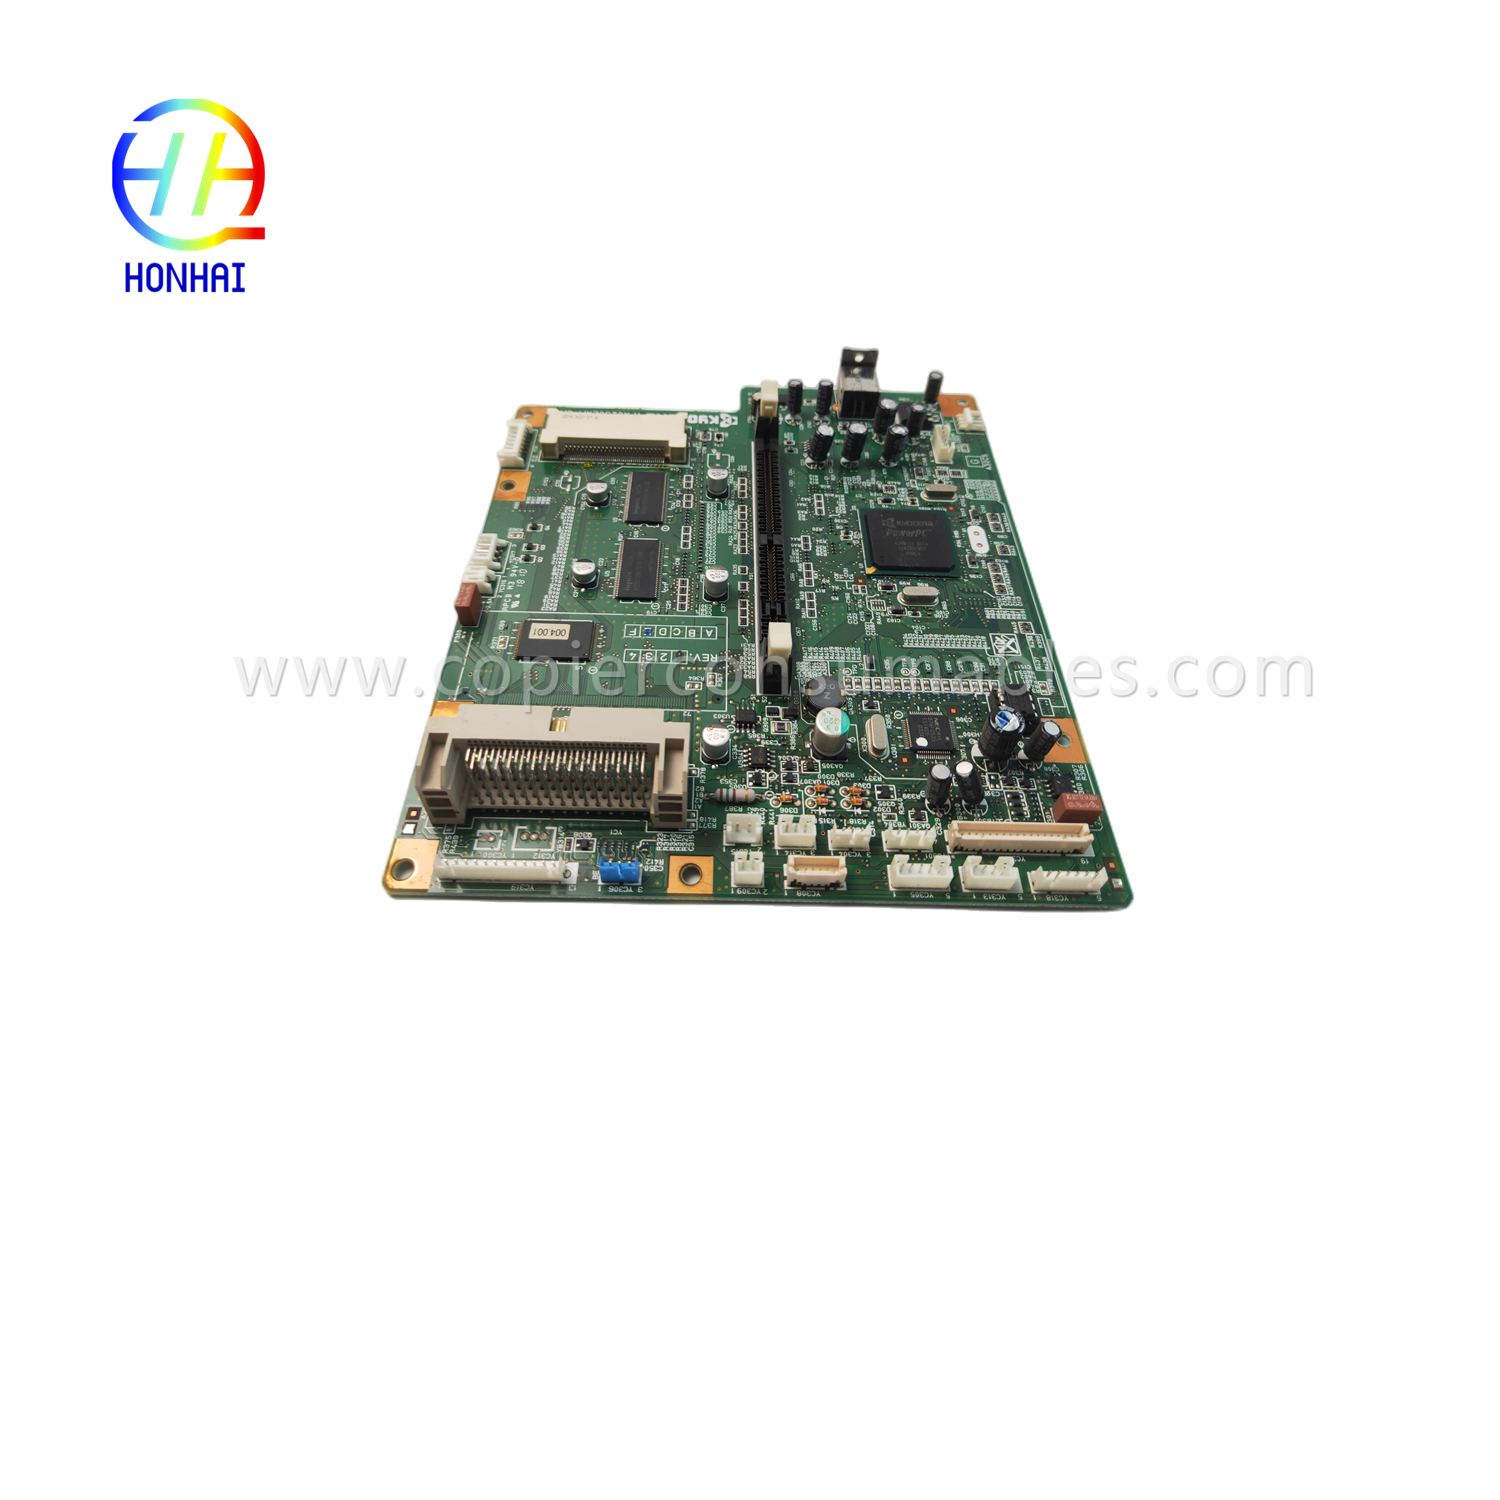 https://c585.goodao.net/mainboard-for-kyocera-fs-1300d-1300dn-7pa0230eamgh01-formatter-board-product/